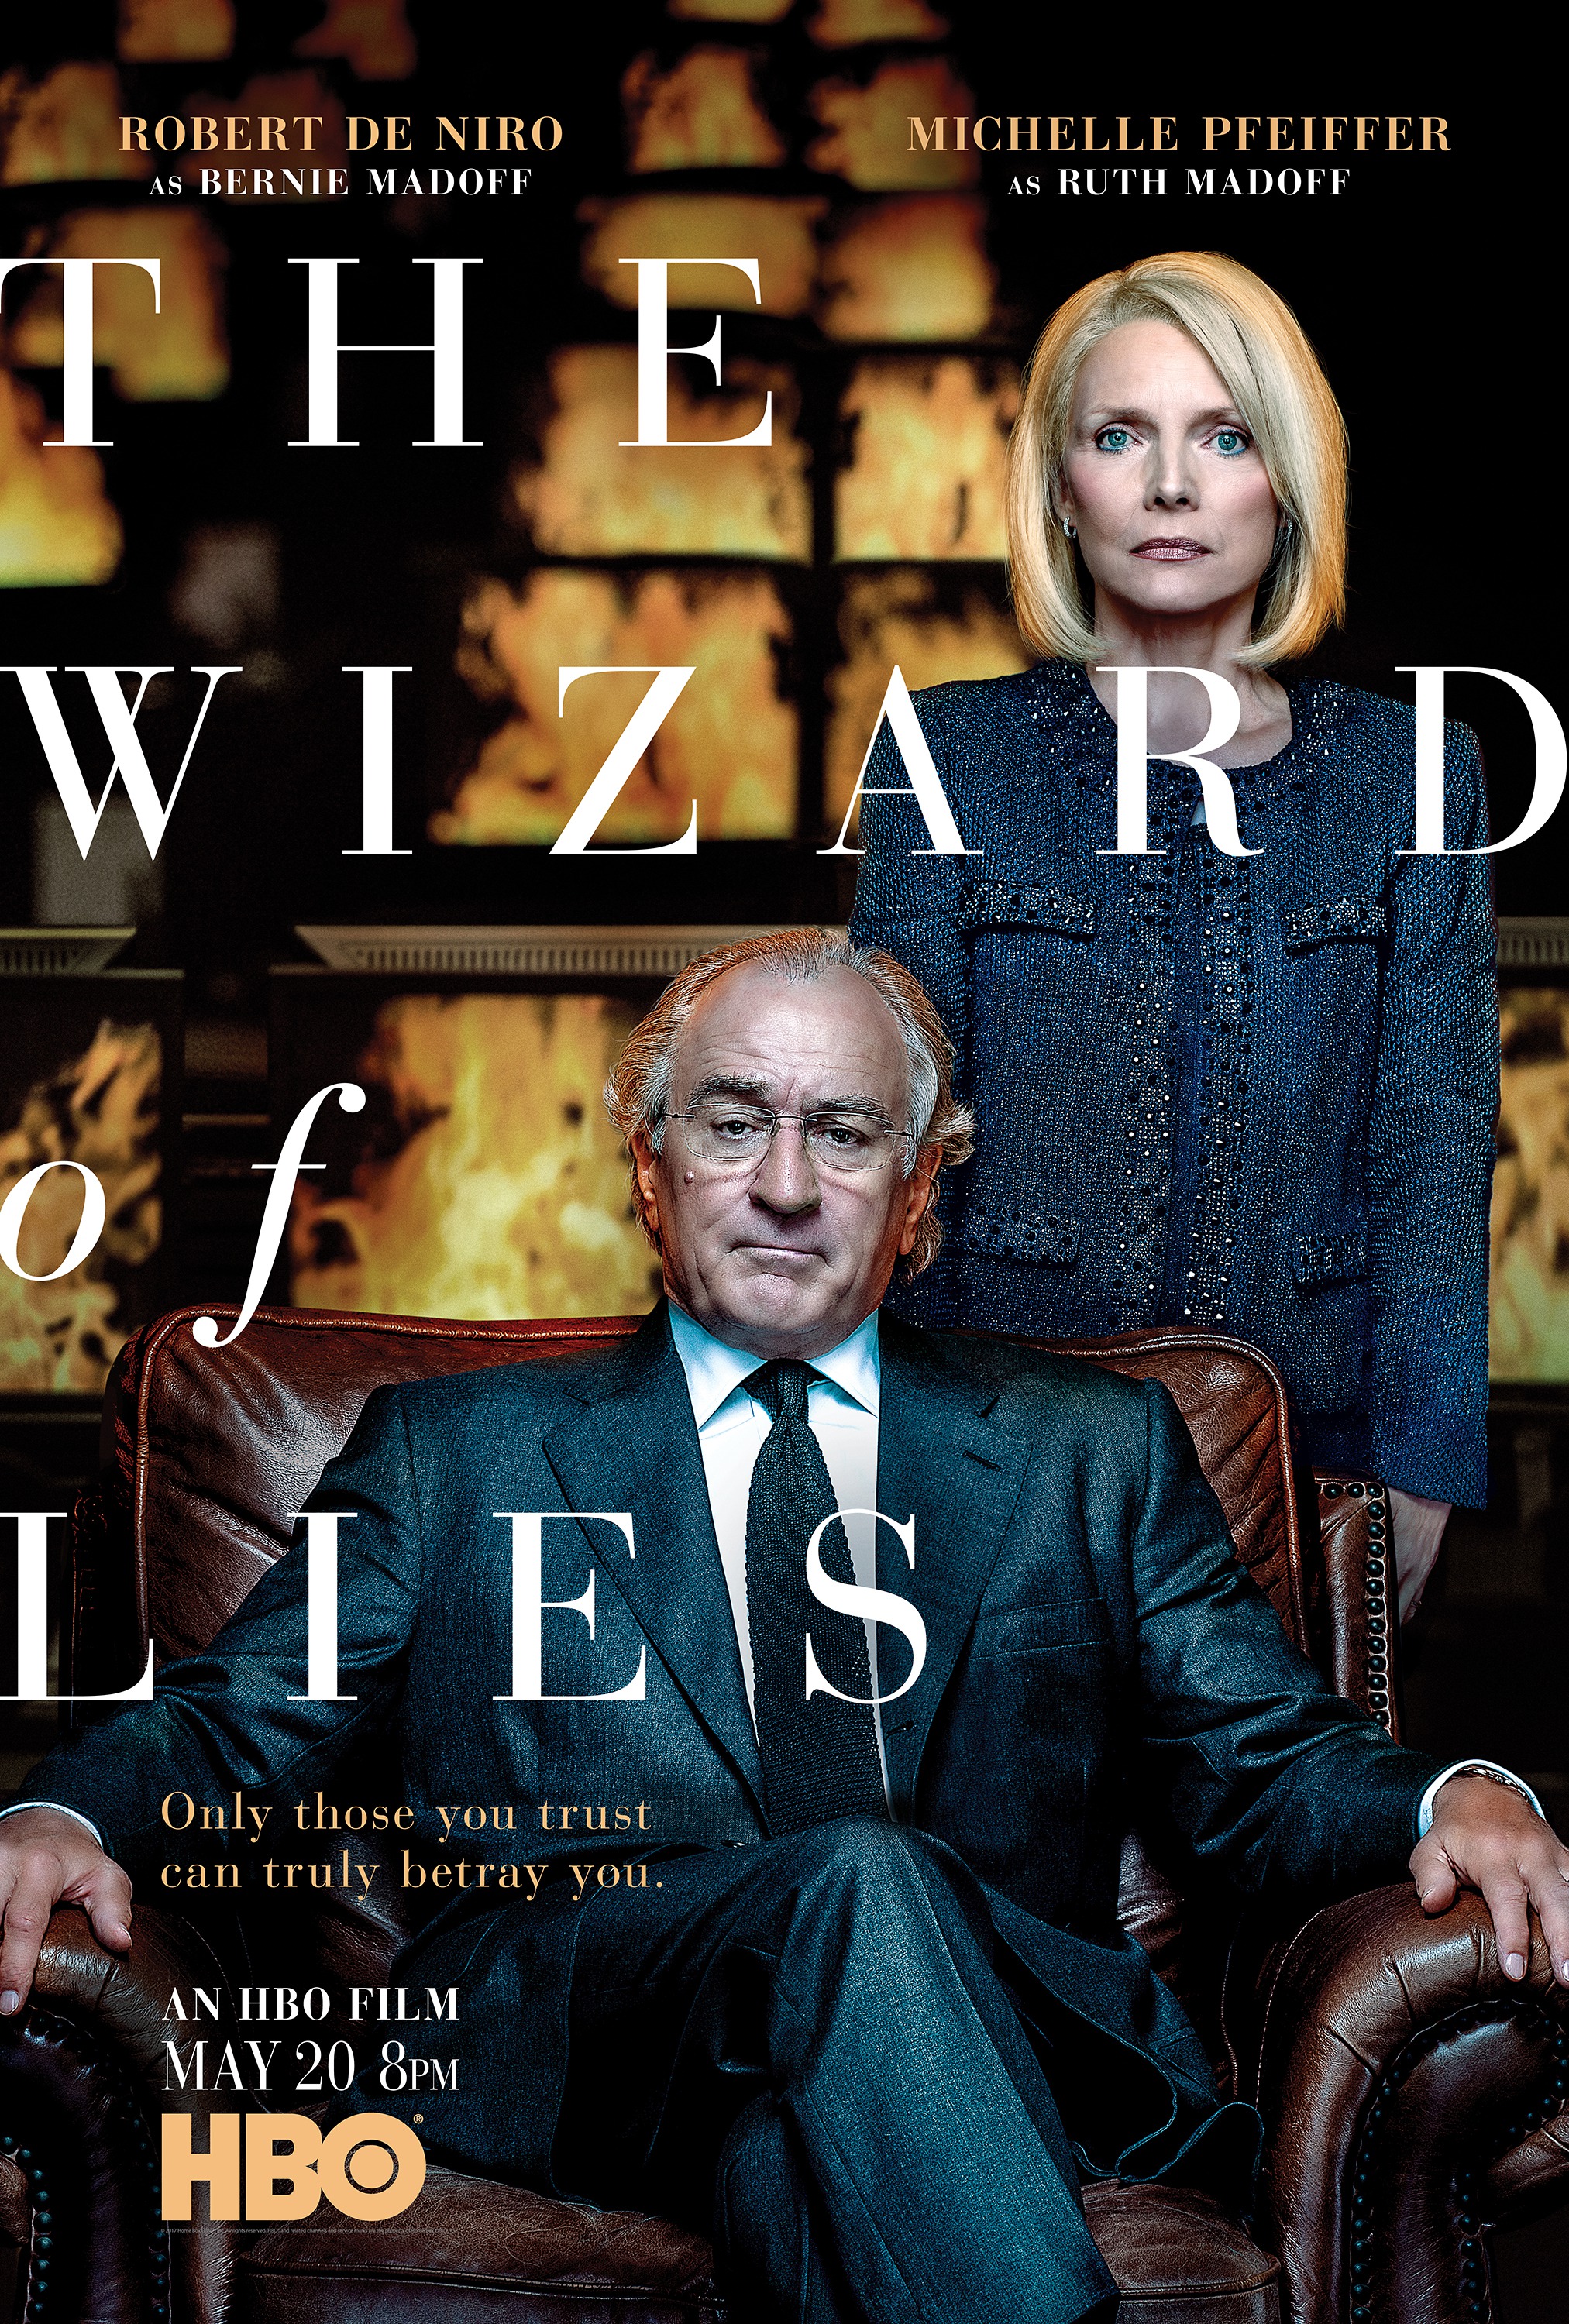 ROBERT DENIRO AND MICHELLE PFEIFFER FOR "THE WIZARD OF LIES", PRODUCED BY HBO